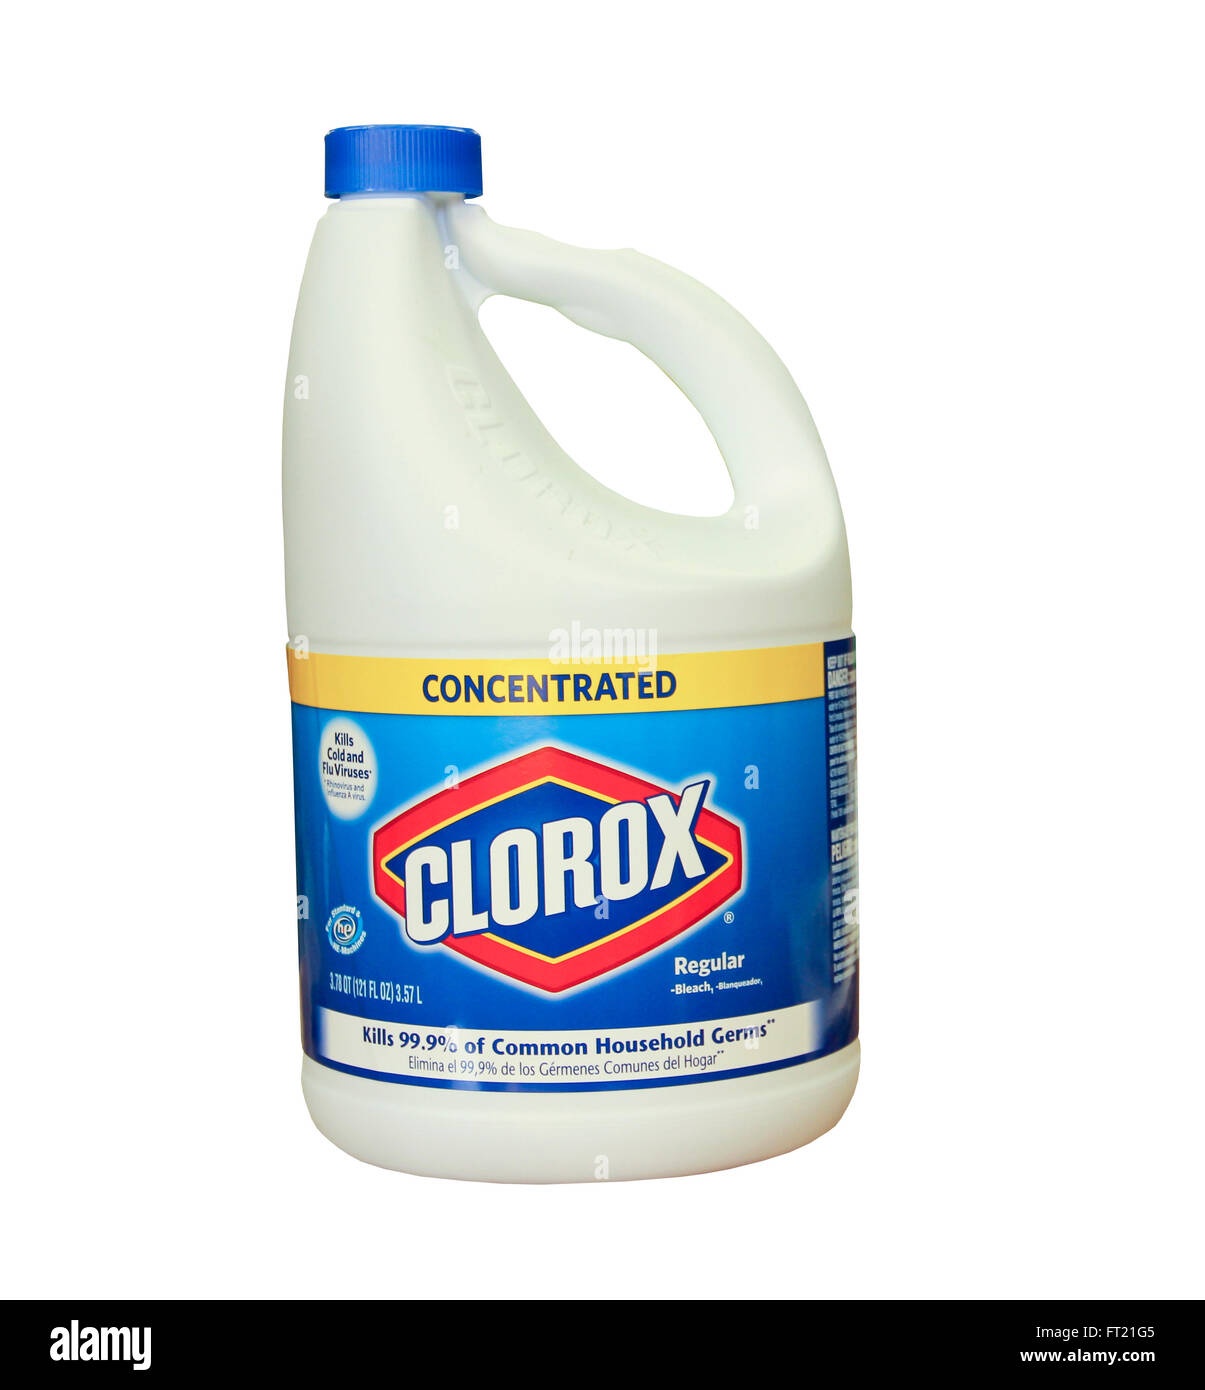 SPENCER , WISCONSIN- MARCH 30, 2014 : bottle of Corox Bleach. Clorox is an American Company founded in 1913. Stock Photo